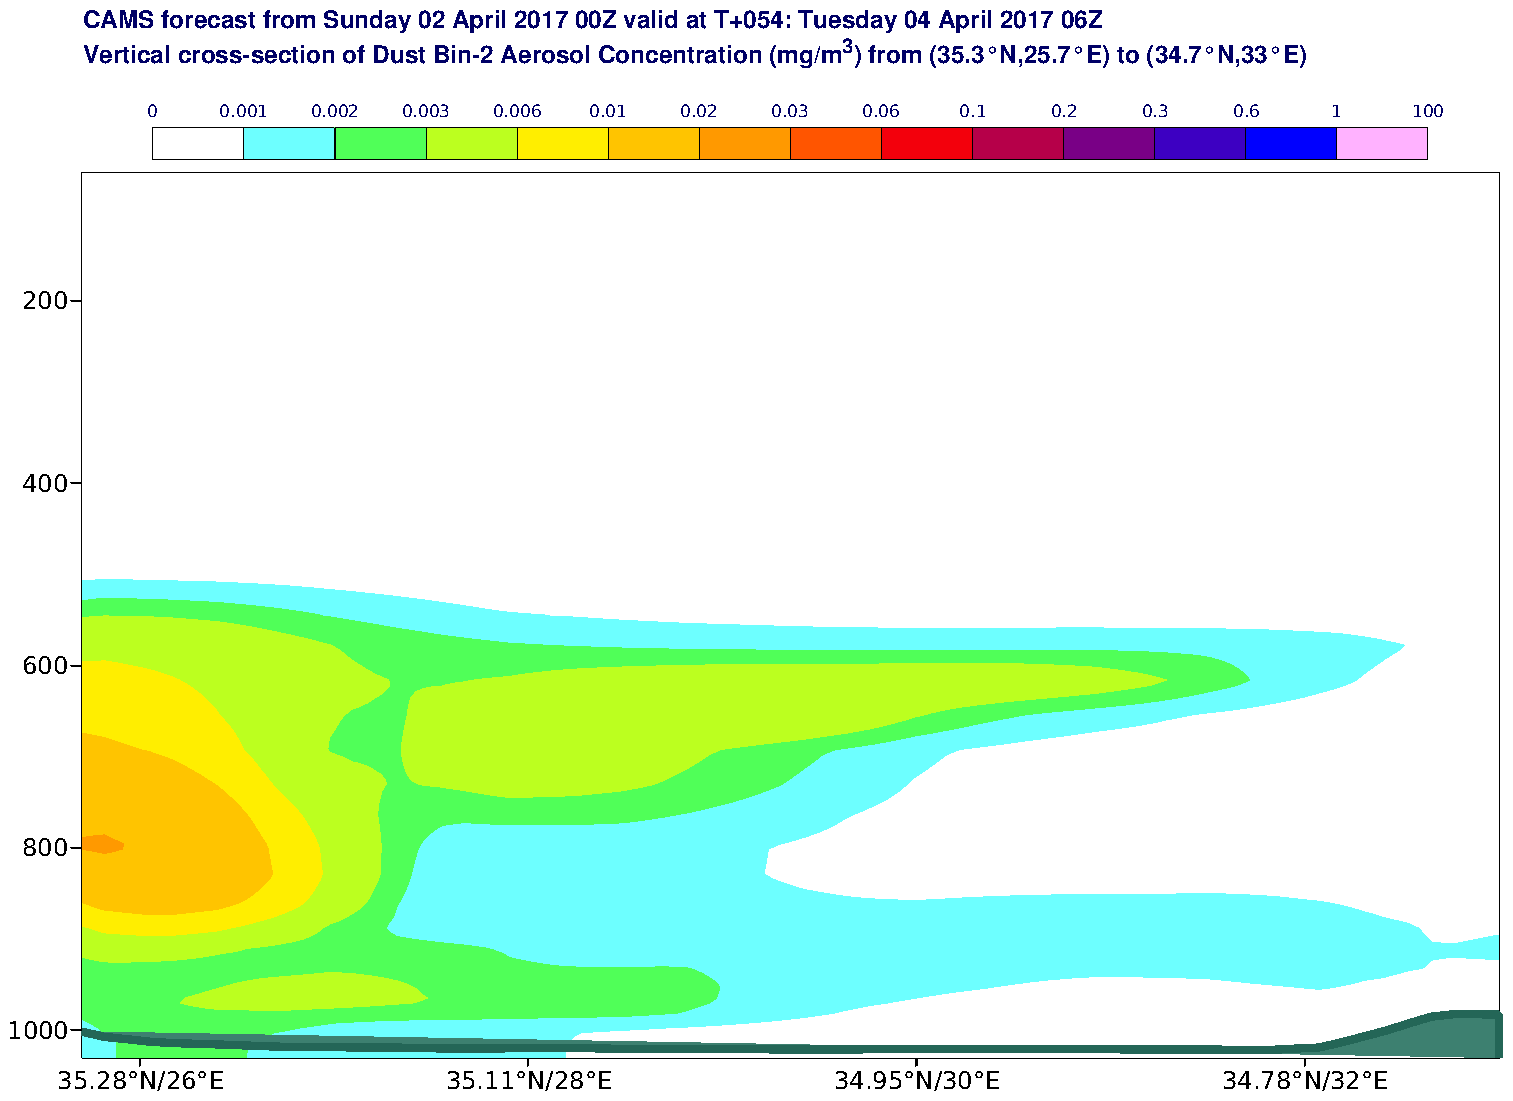 Vertical cross-section of Dust Bin-2 Aerosol Concentration (mg/m3) valid at T54 - 2017-04-04 06:00